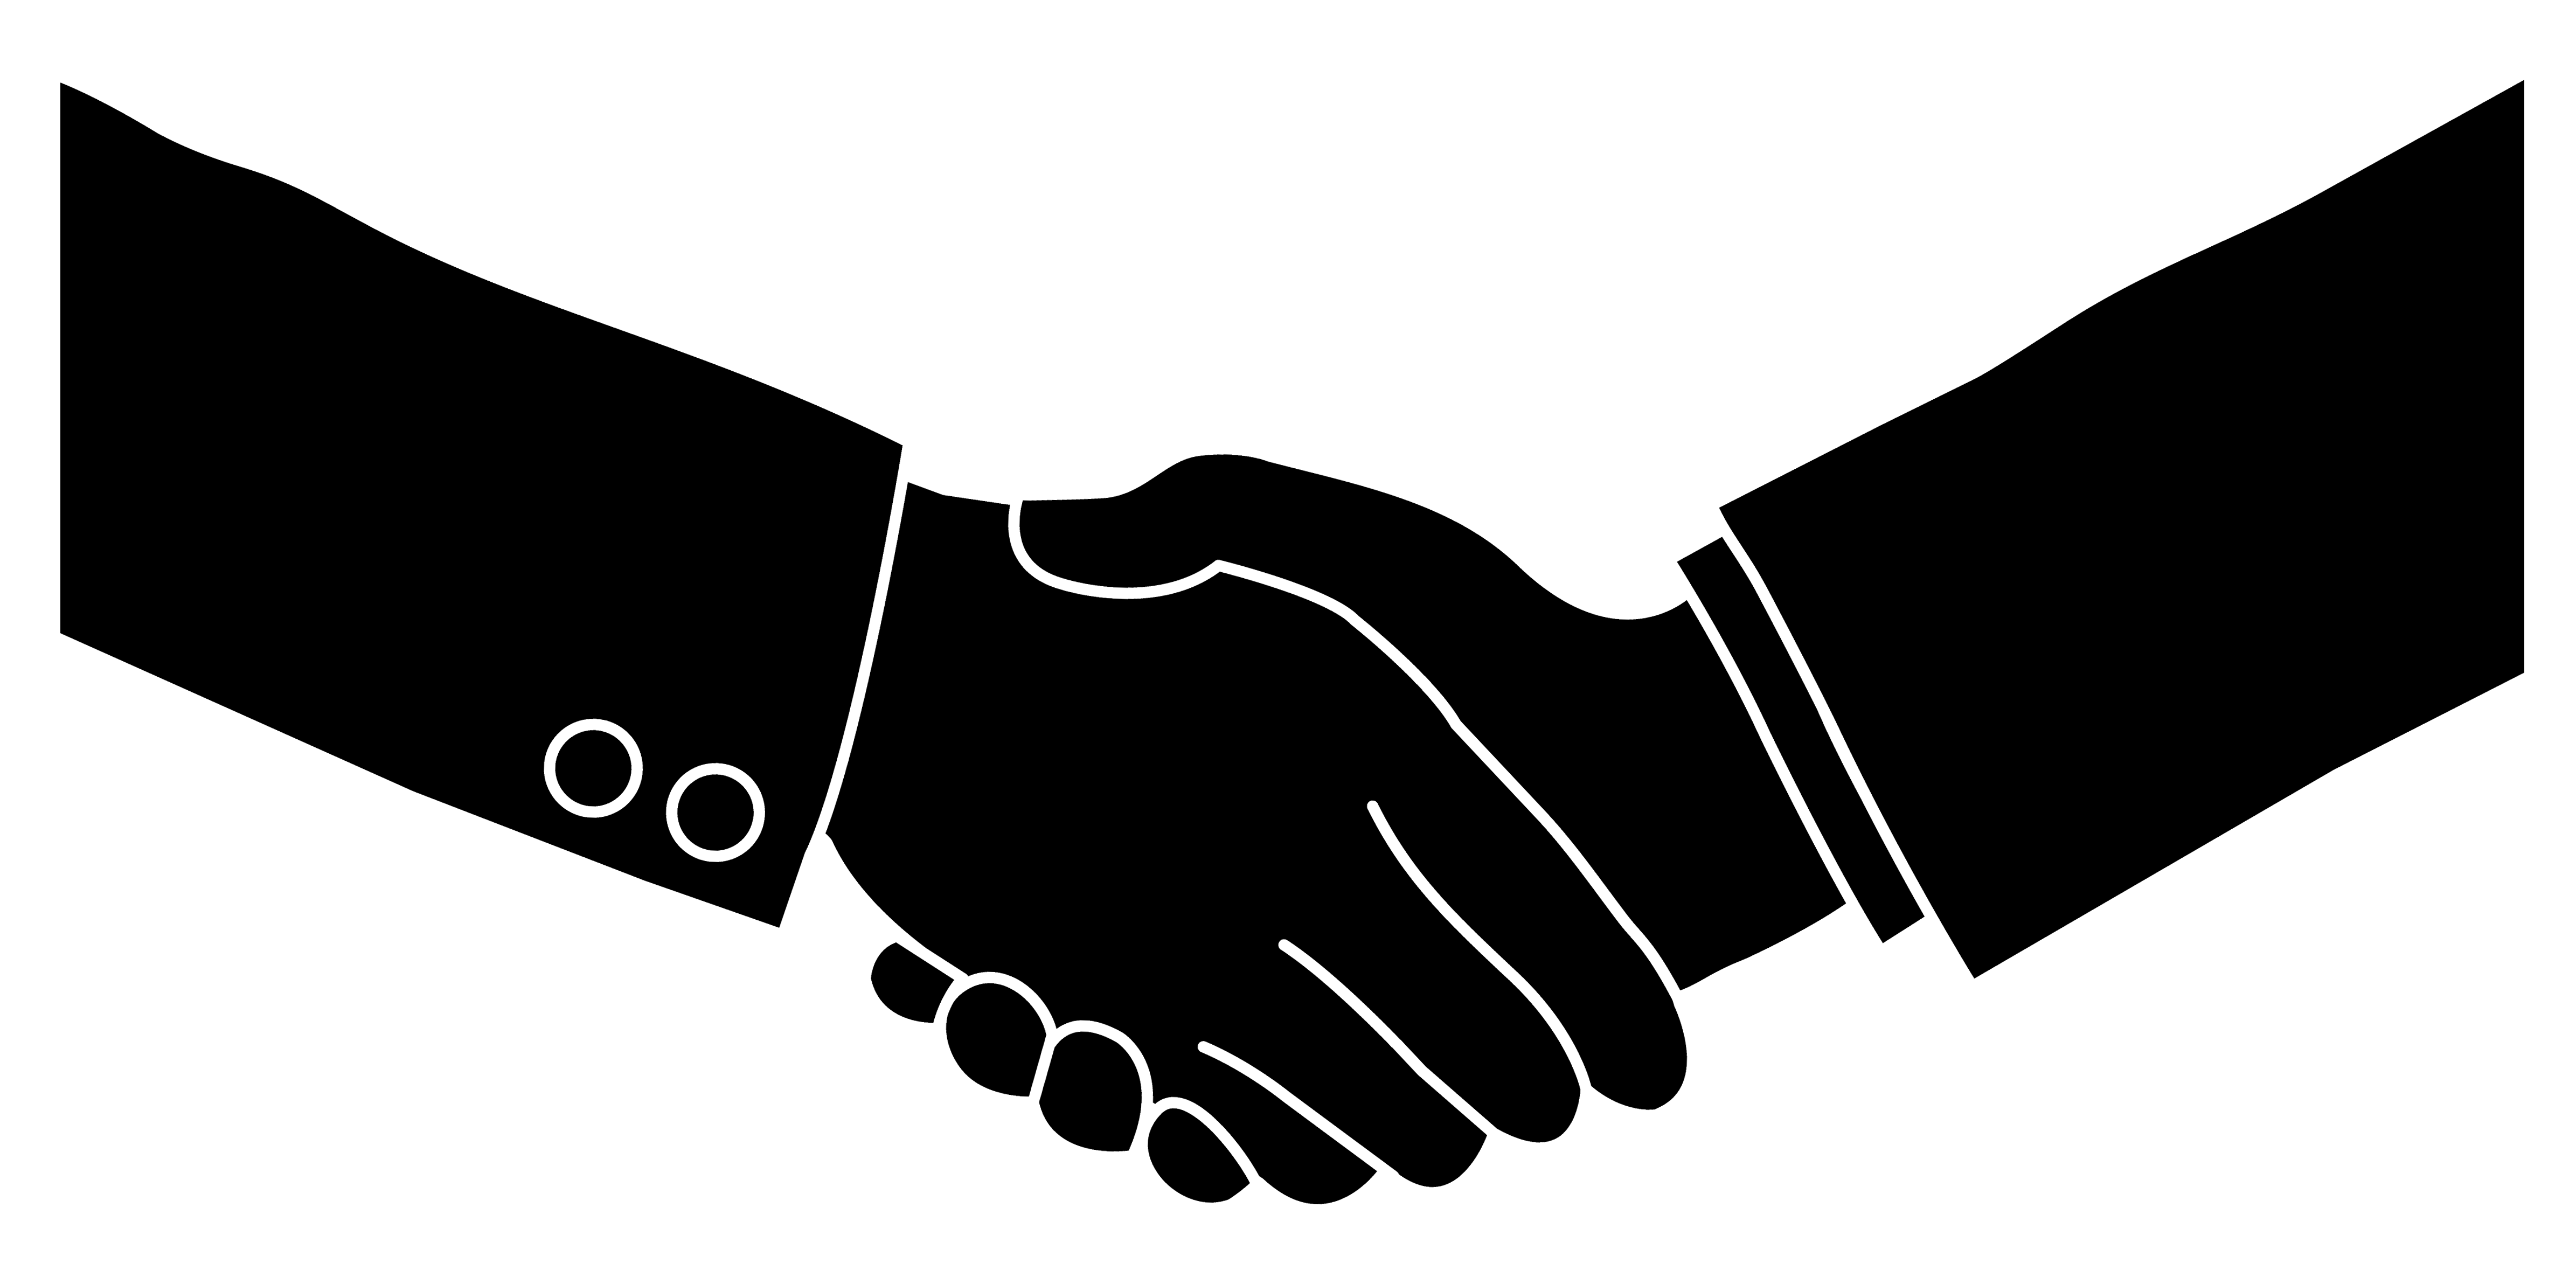 Shaking hands clip art.png | Clipart library - Free Clipart Images